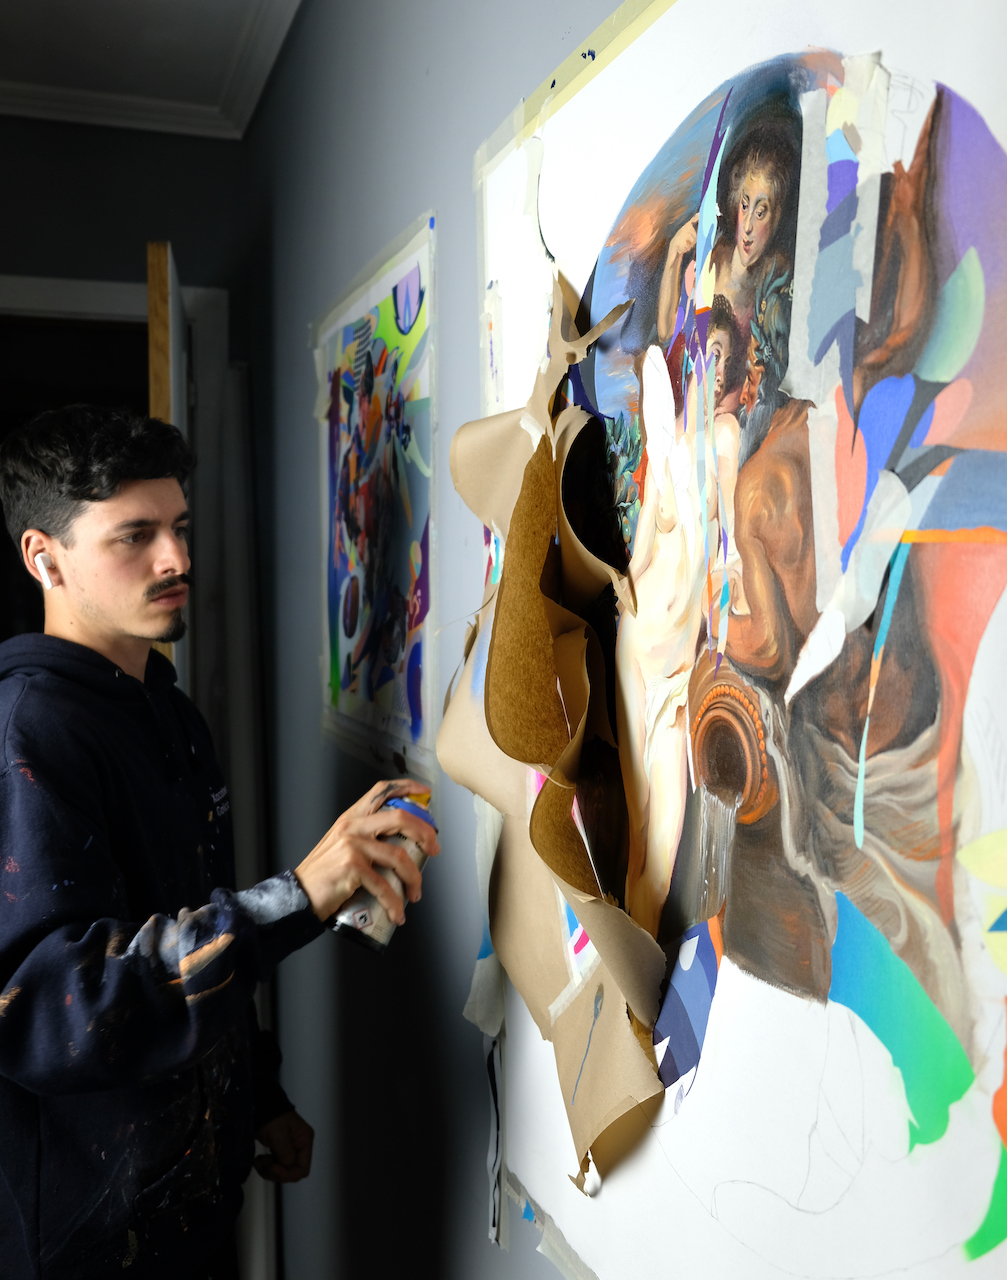 Murfin holding a spray can, working on a three-dimensions artwork hanging on wall